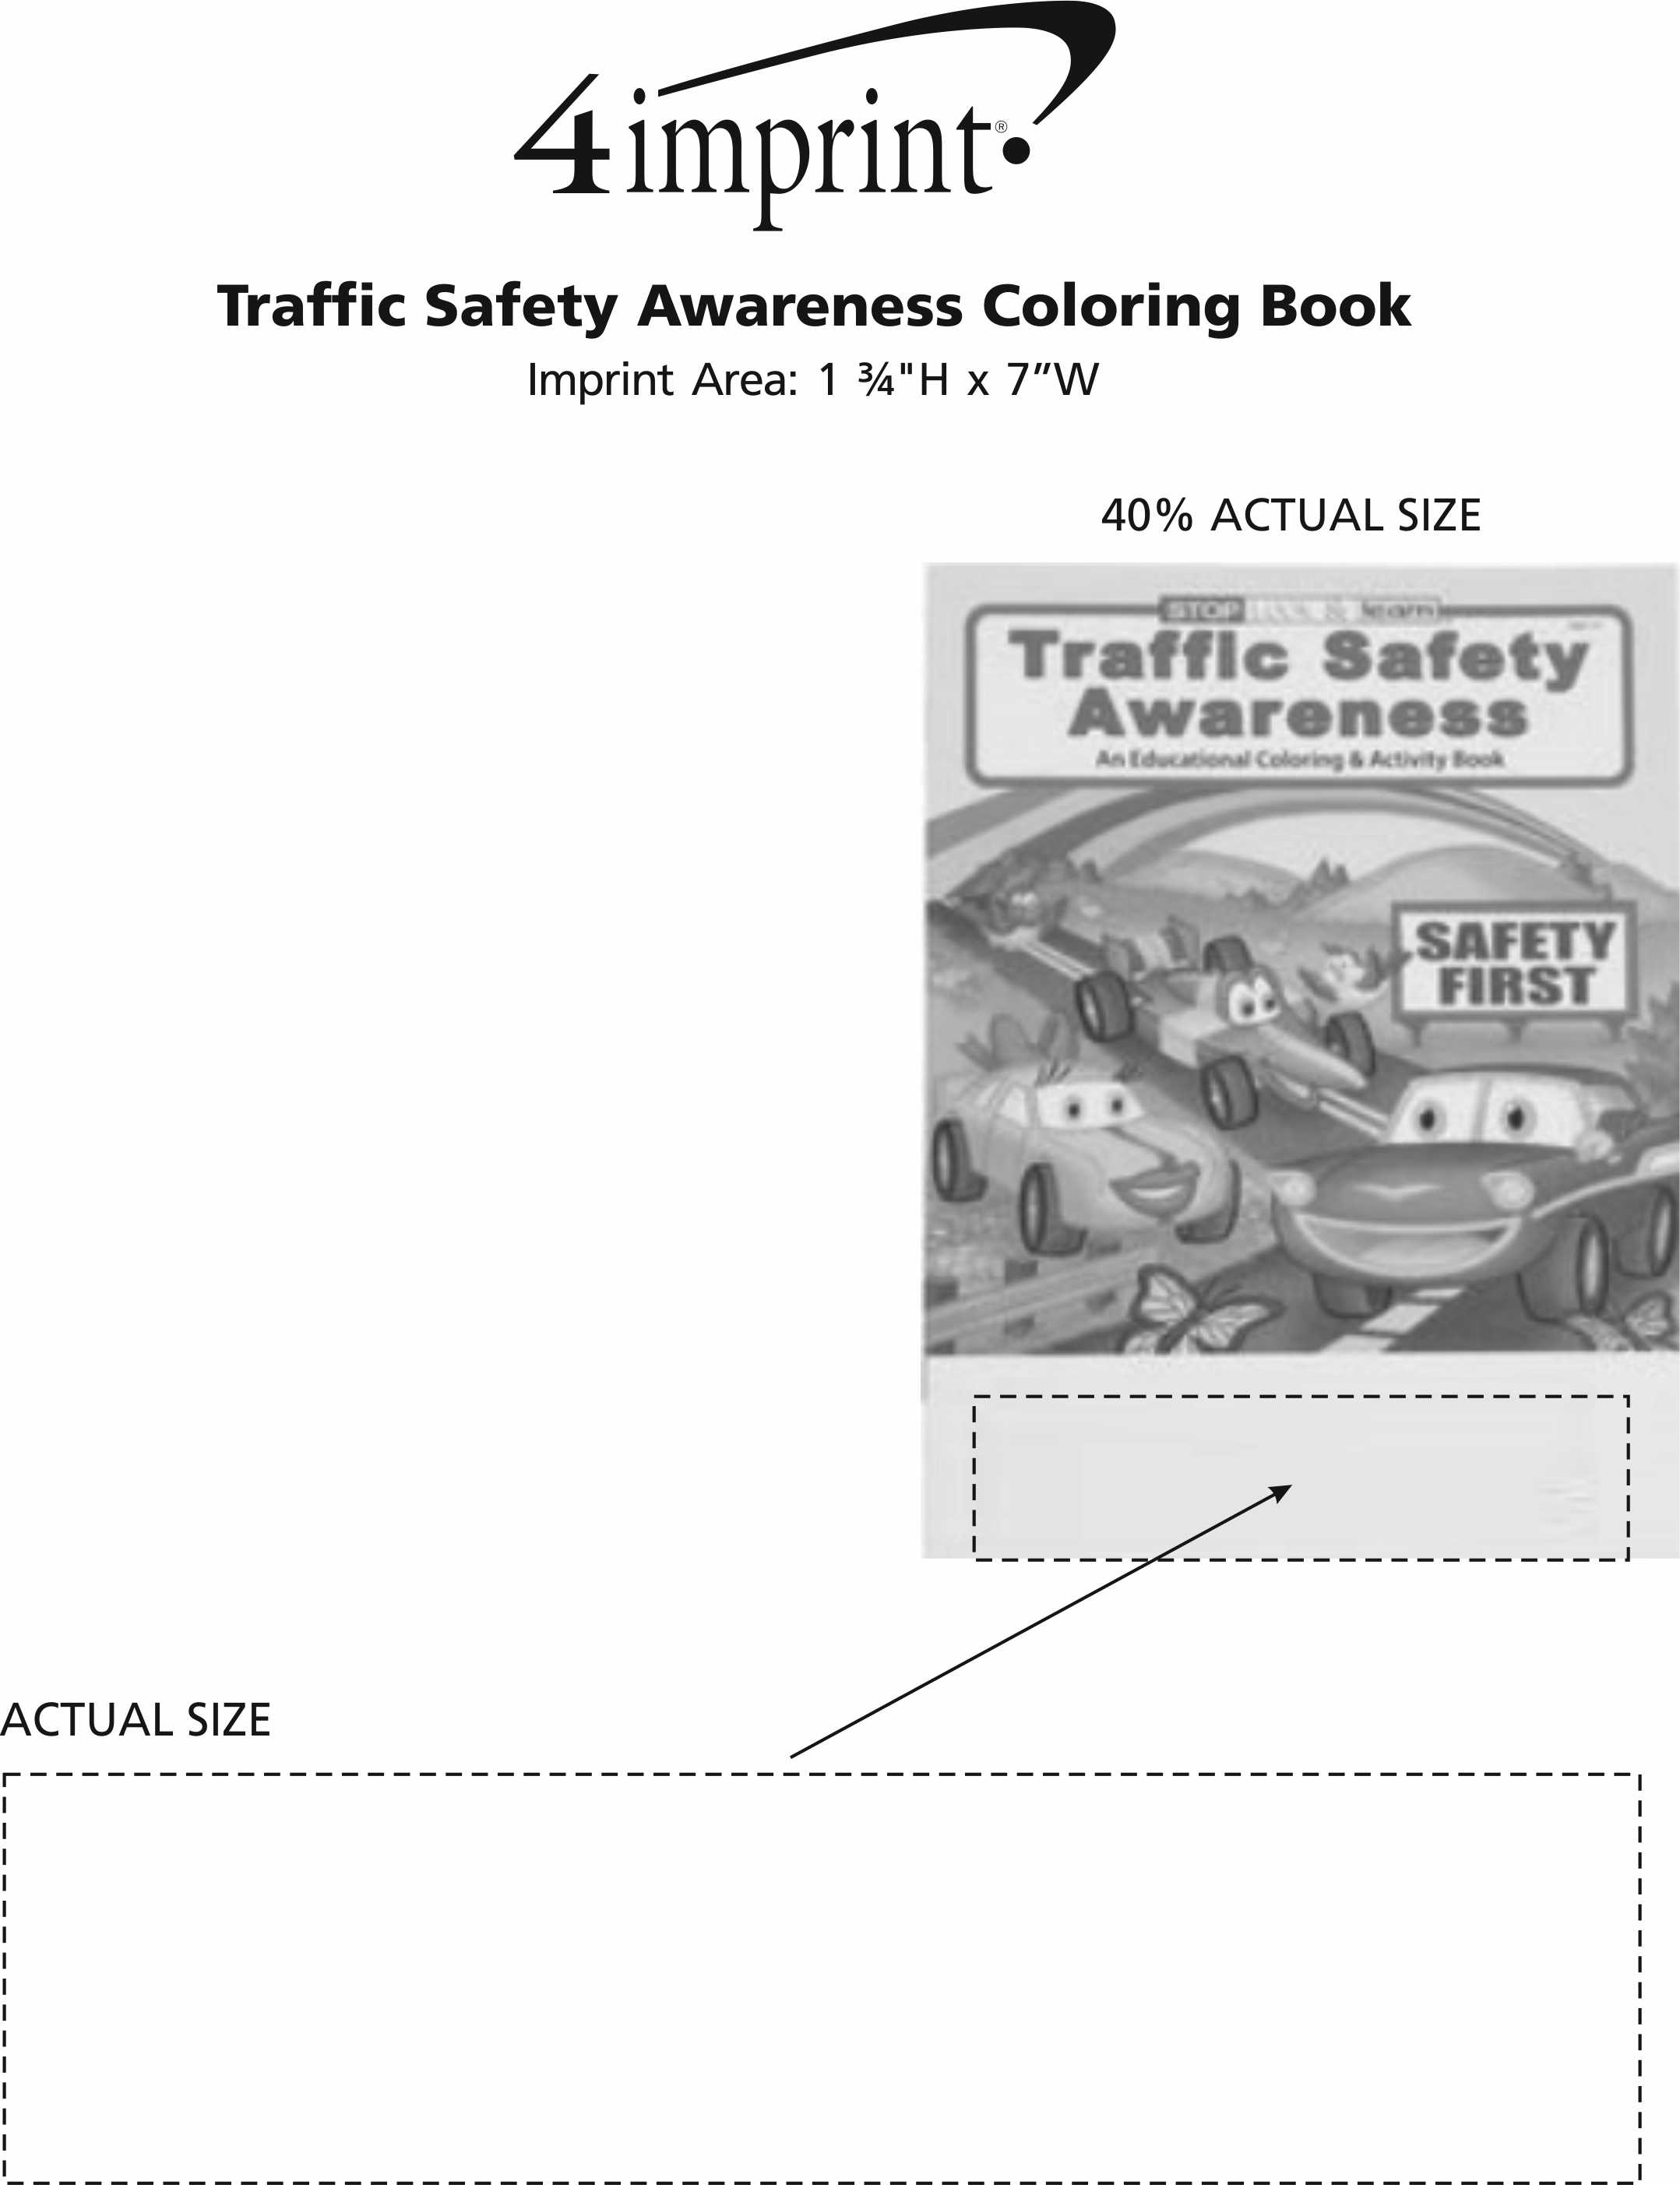 Imprint Area of Traffic Safety Awareness Coloring Book